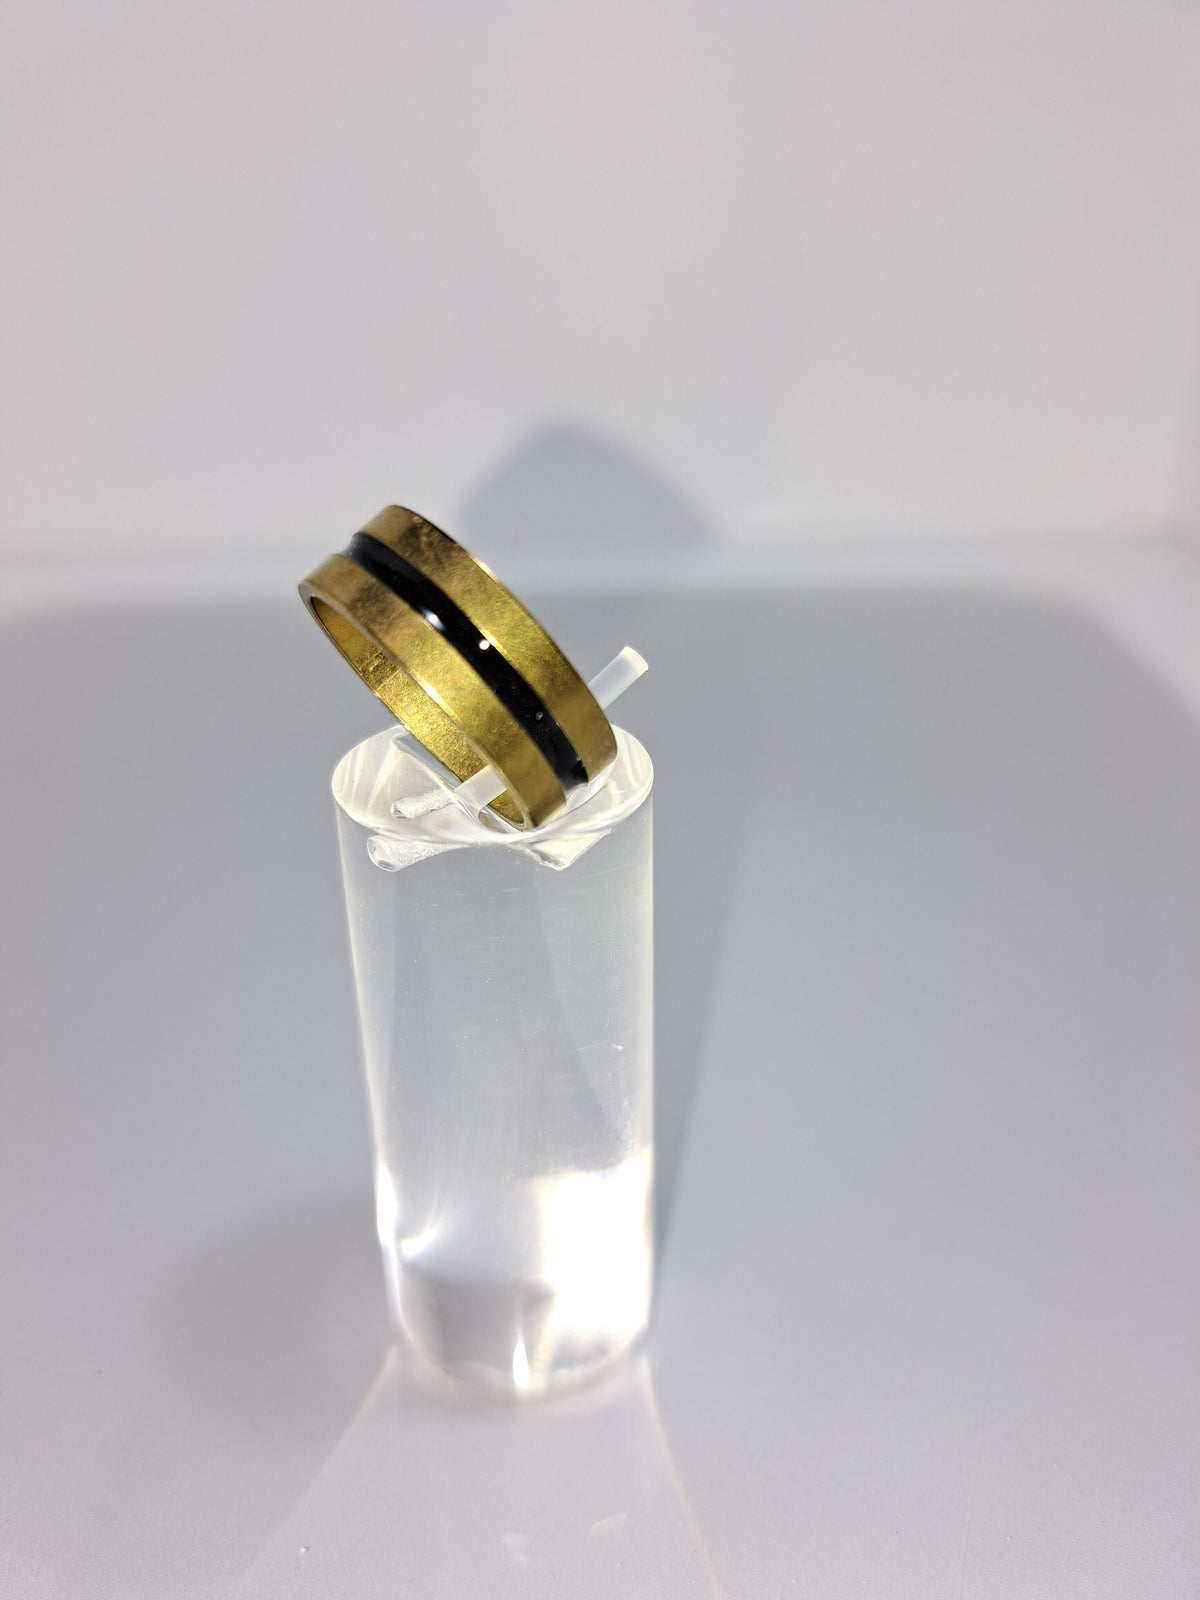 Gold stainless steel unisex ring with a black rounded channel around the band. Perfect costume jewellery.